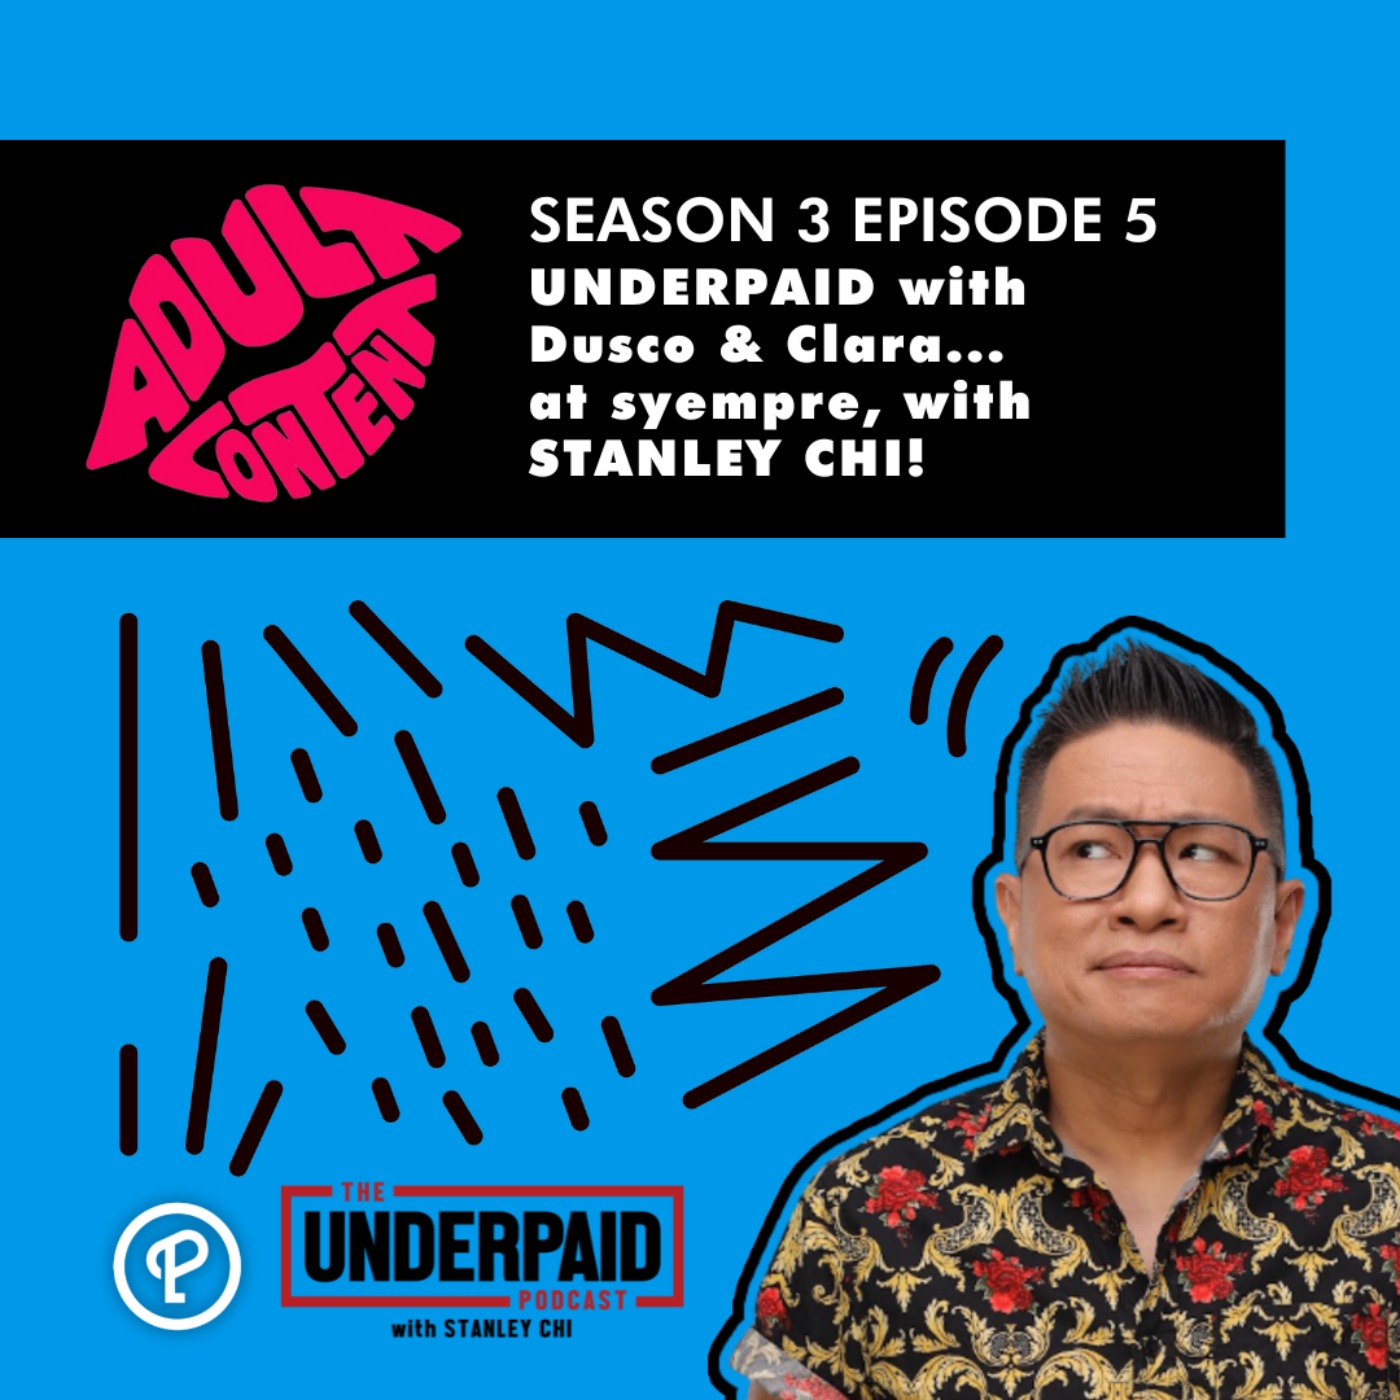 S3E5: UNDERPAID, with Dusco & Clara! At syempre with our ultimate  IMORTAL, STANLEY CHI!